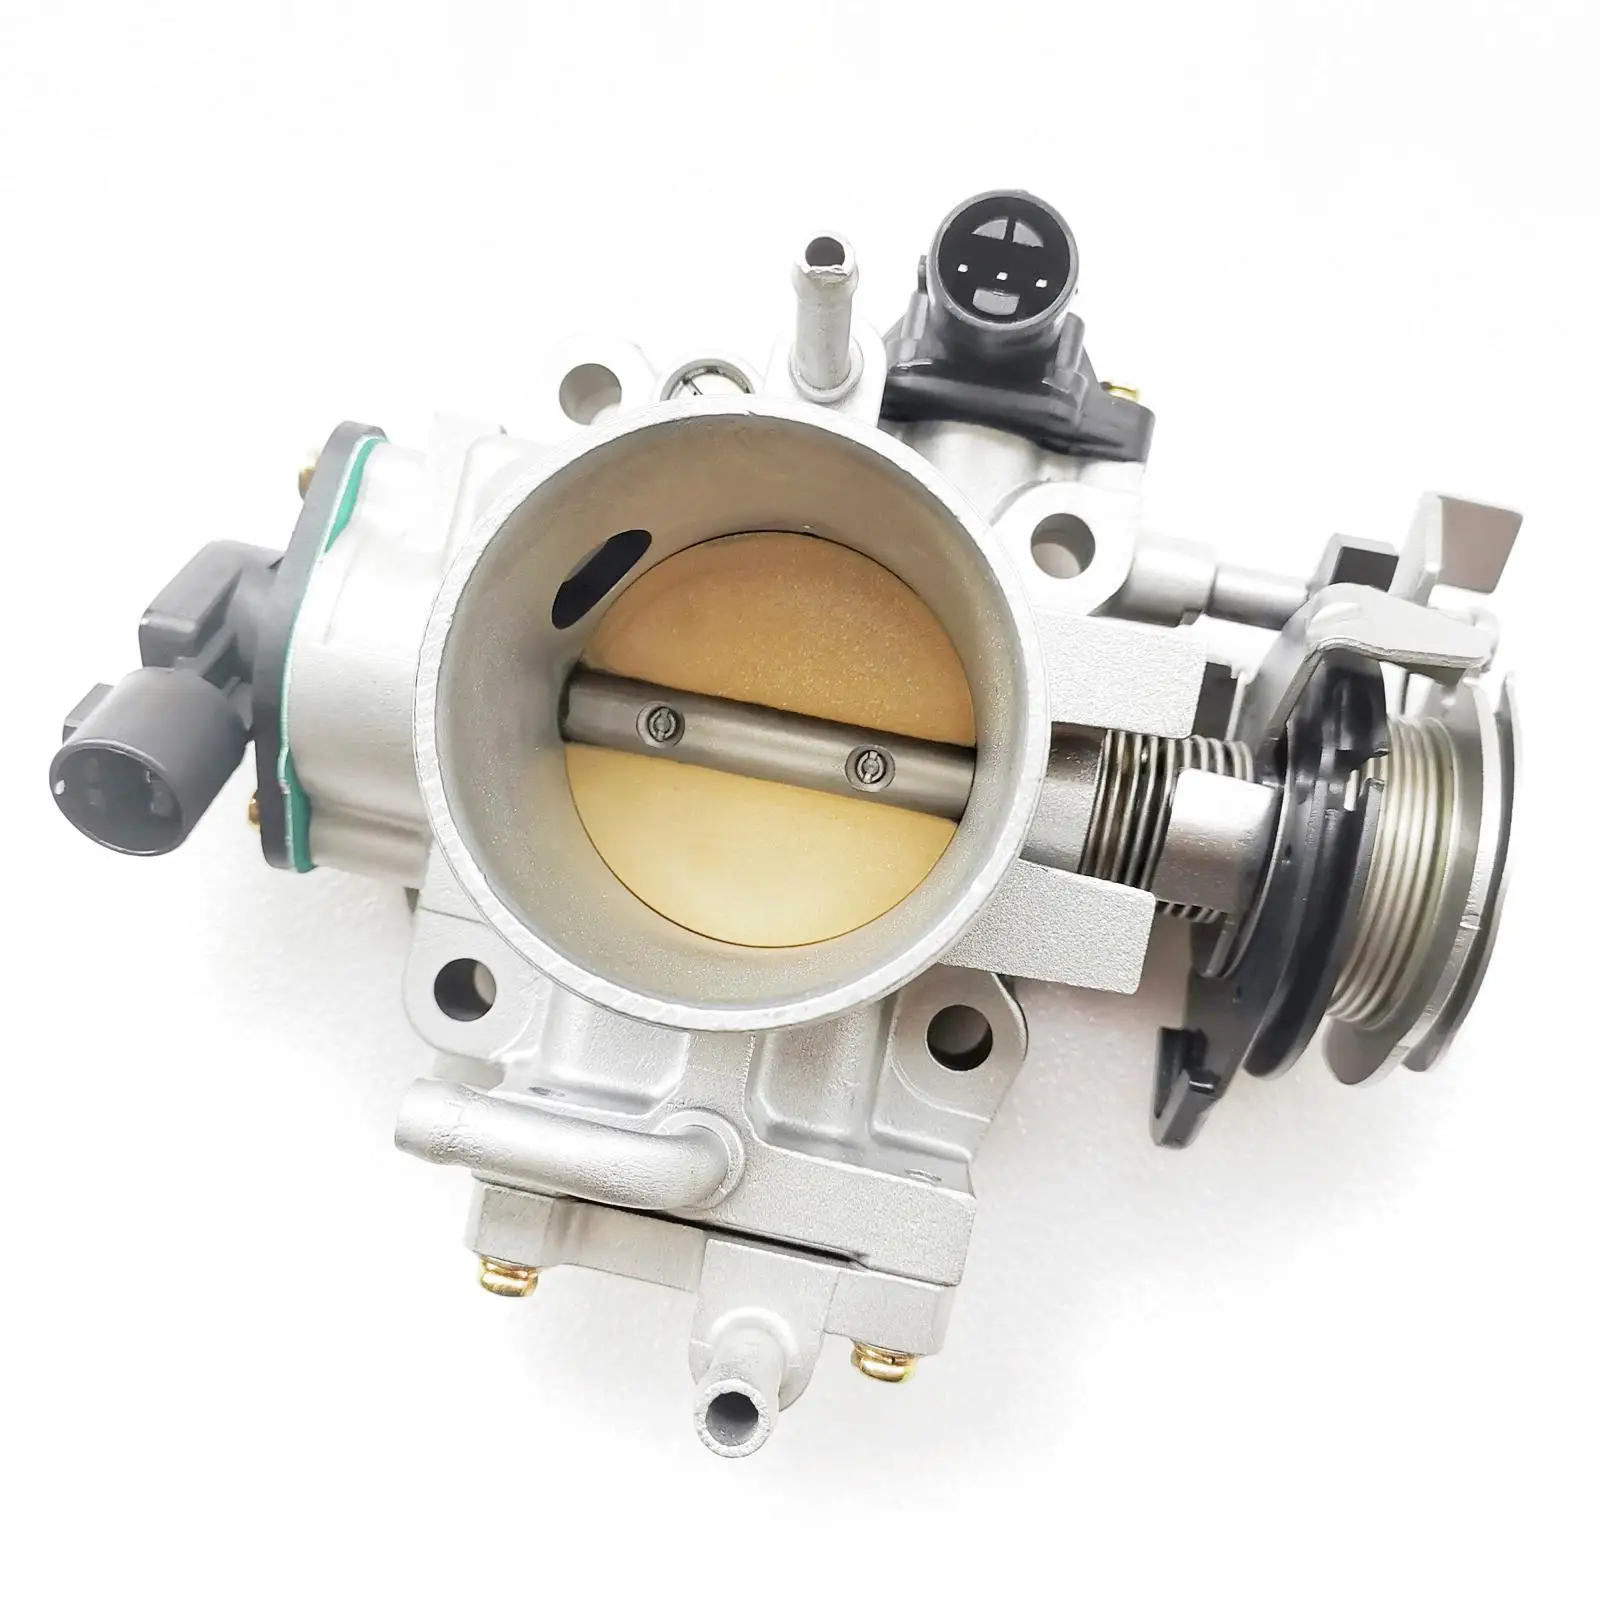 Throttle Body Assembly 16400PAAA61 for Honda Accord LX DX 2003-2005 Vehicle